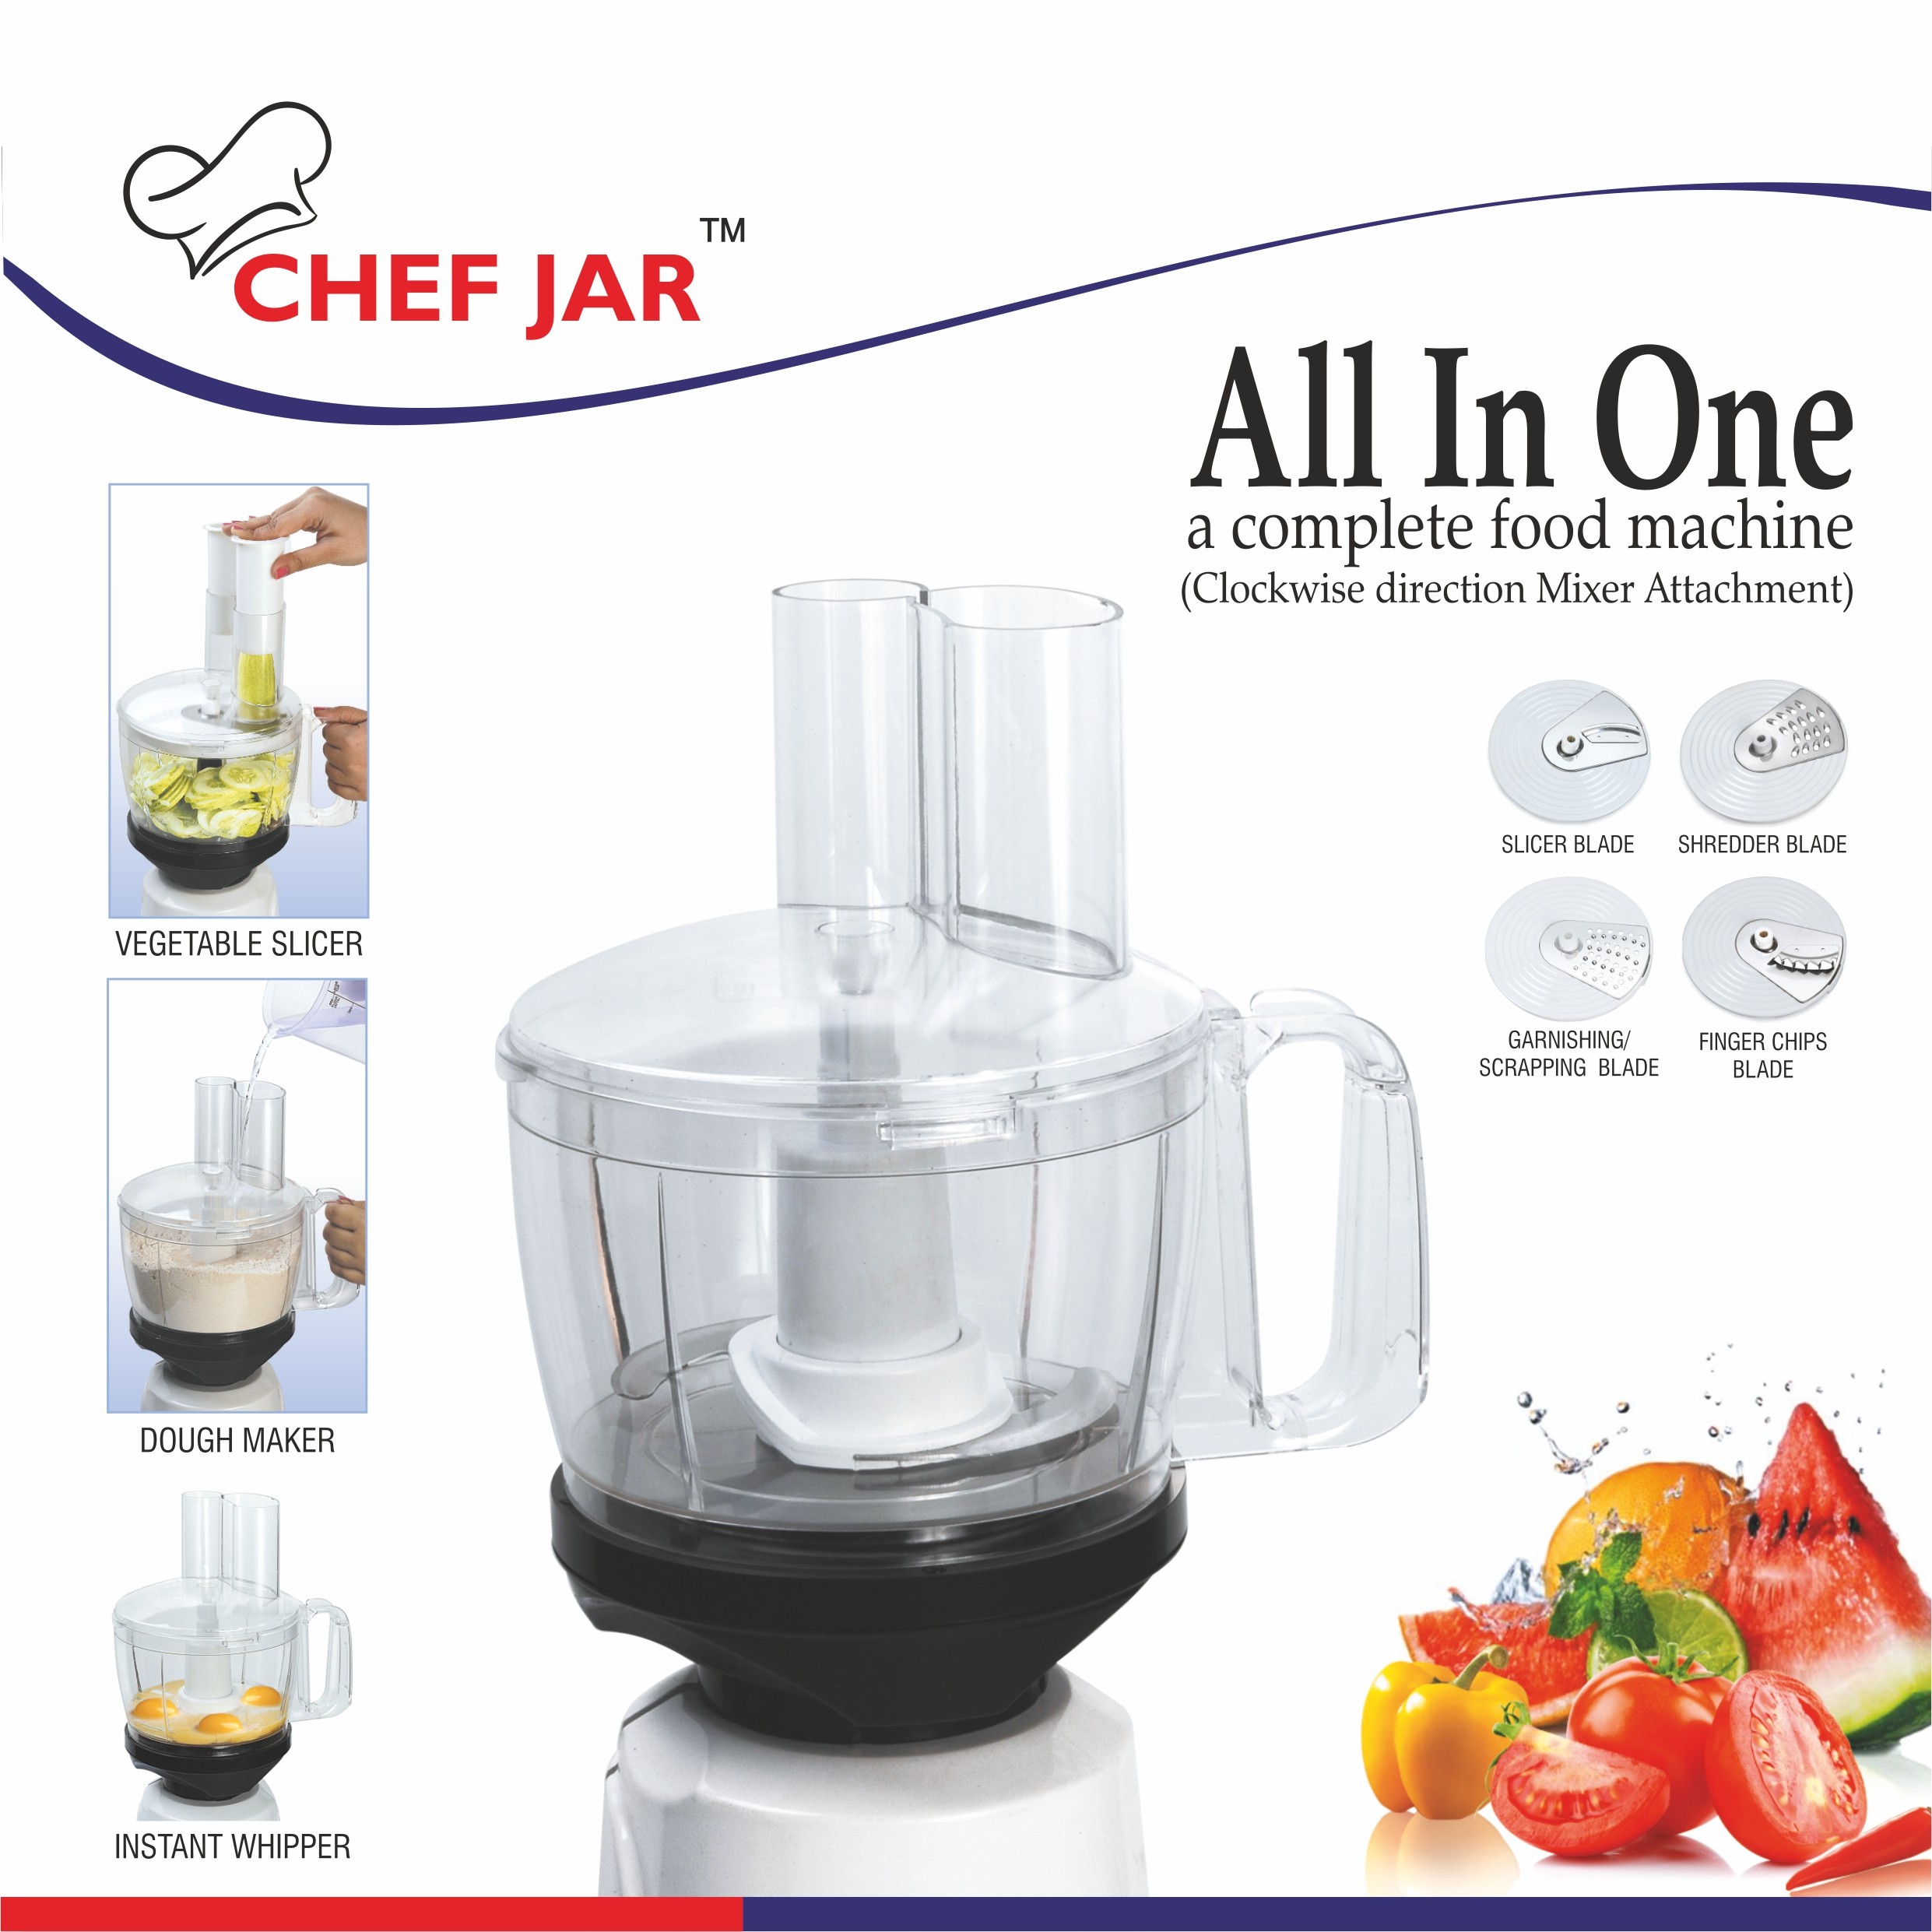 chef-jar-all-in-one-a-complete-food-processor-attachment-for-most-indian-mixer-grinders-compatible-with-all-preethi-premier-models-except-preethi-steele1